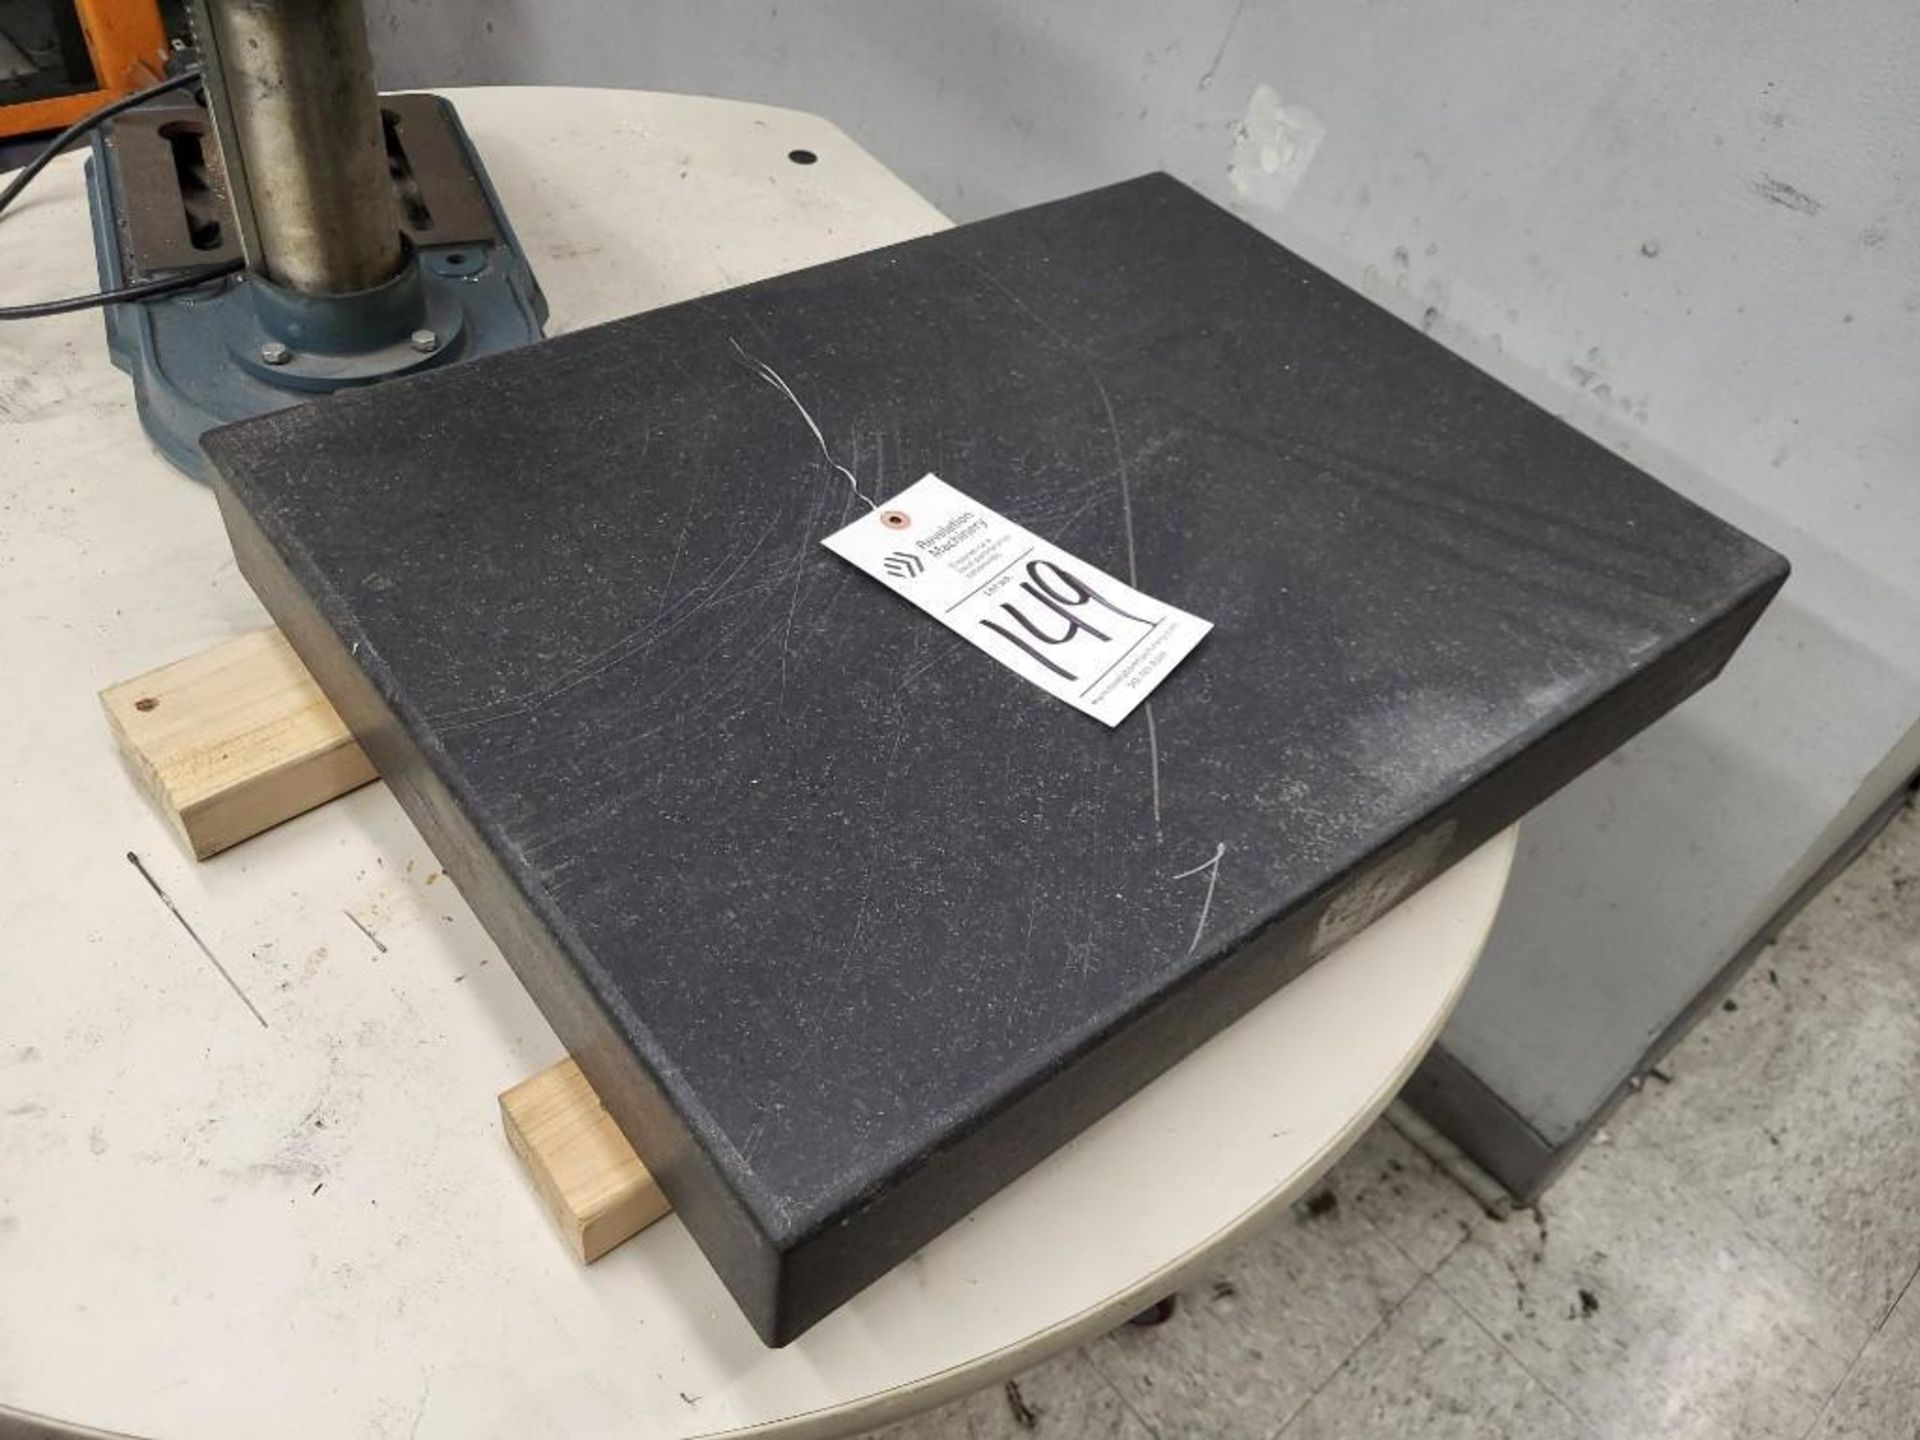 BLACK GRANITE INSPECTION SURFACE PLATE - Image 2 of 4